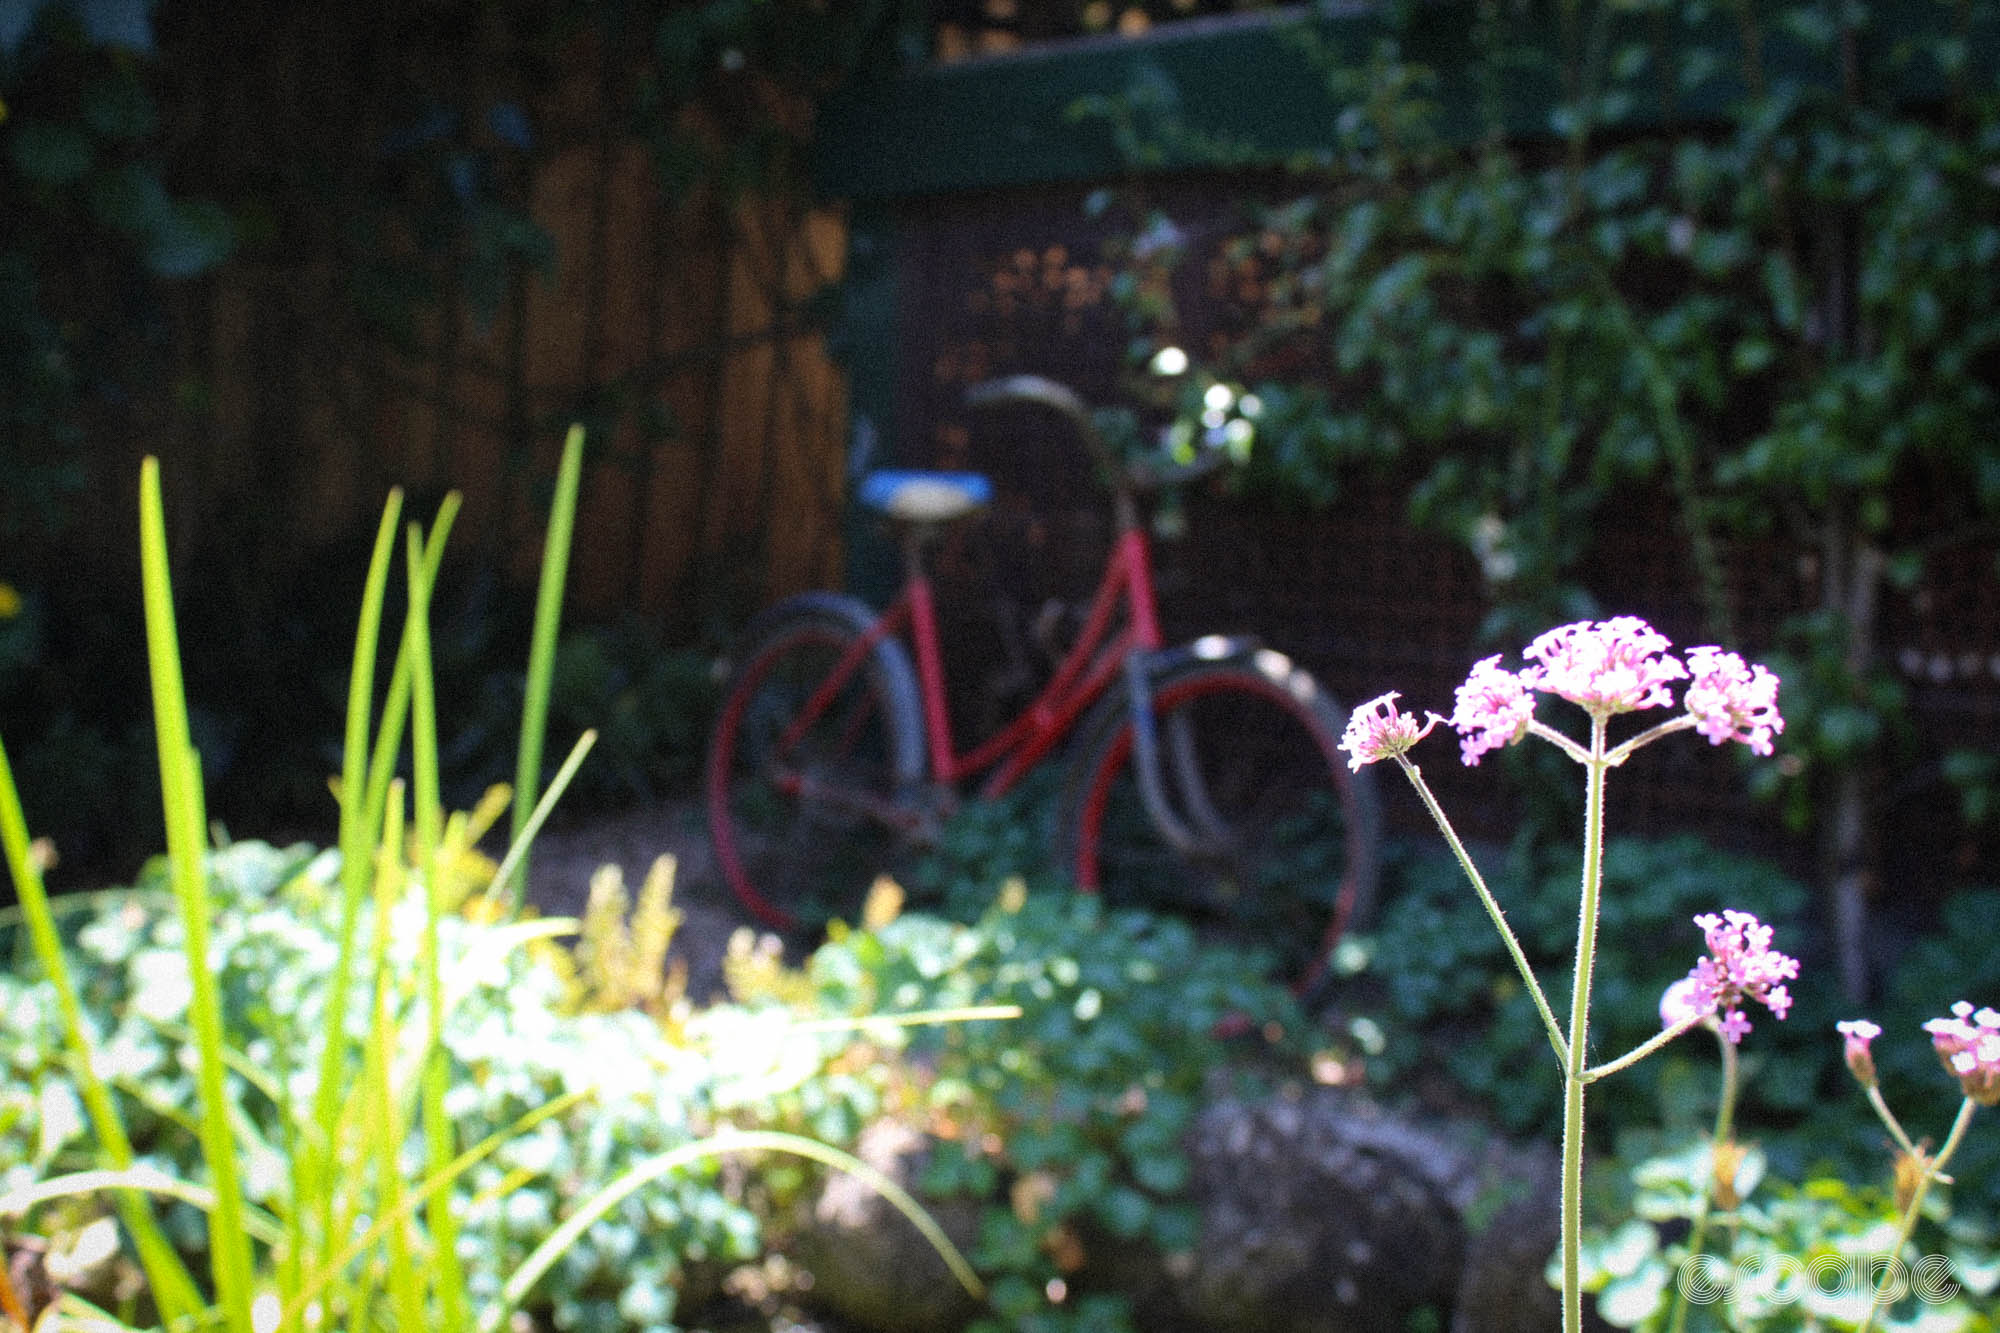 The bike, blurry in the background, leans against a wall. A purple flower, foreground, is in focus. 